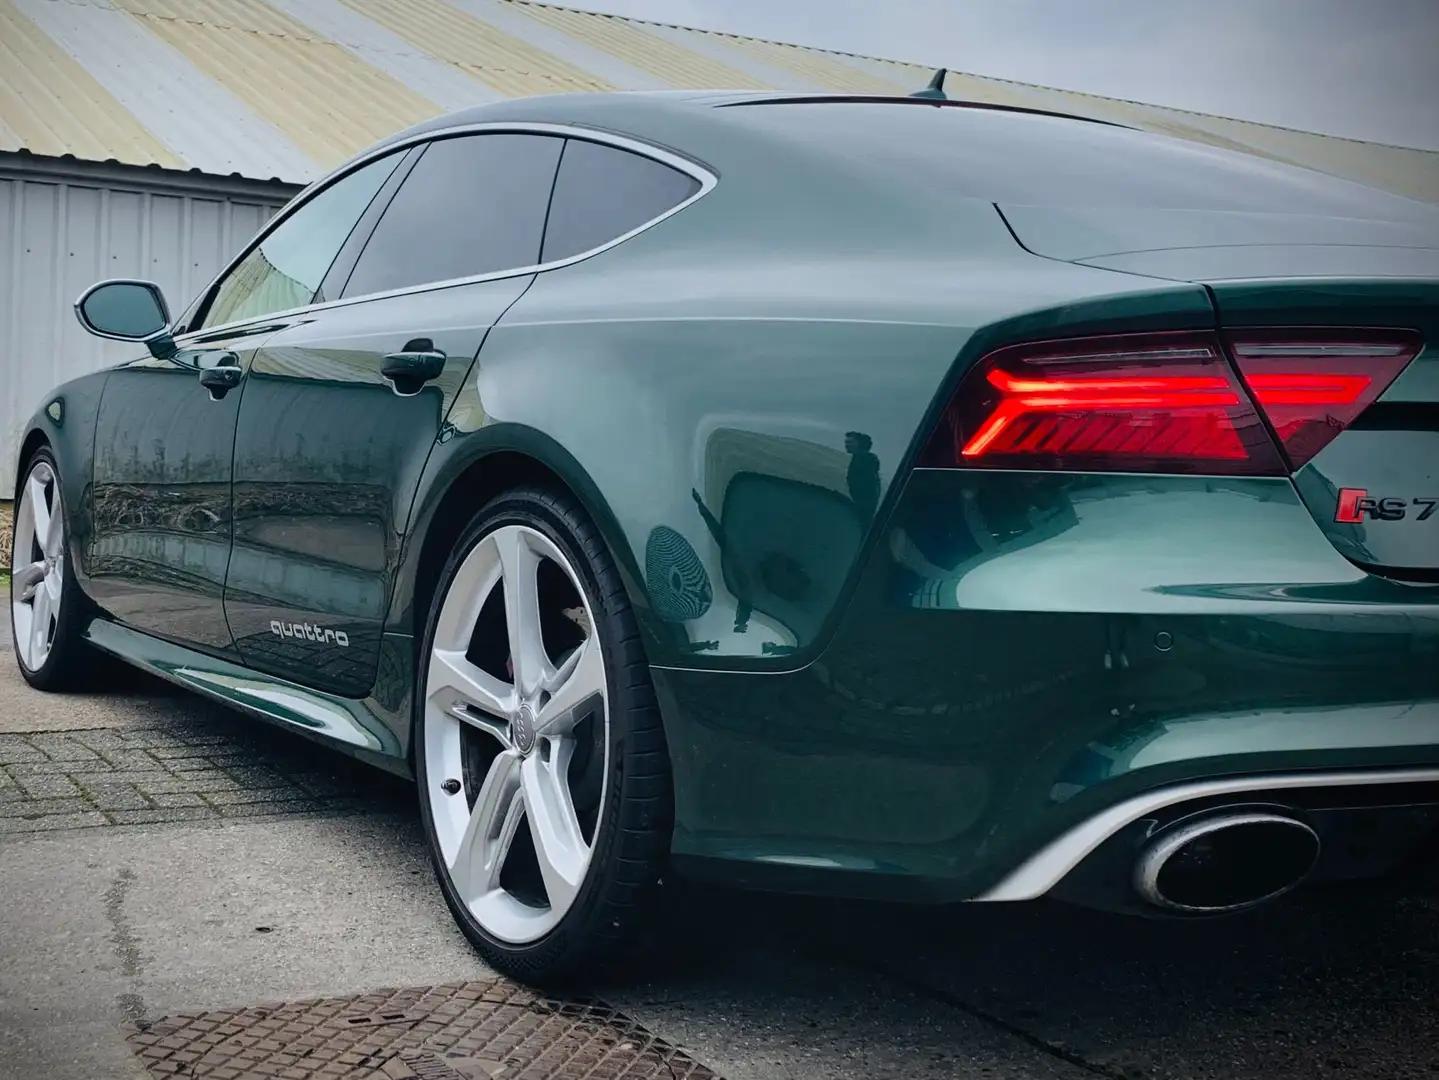 Audi RS7 Verdant Green - Audi Exclusive - from collector Zelená - 2